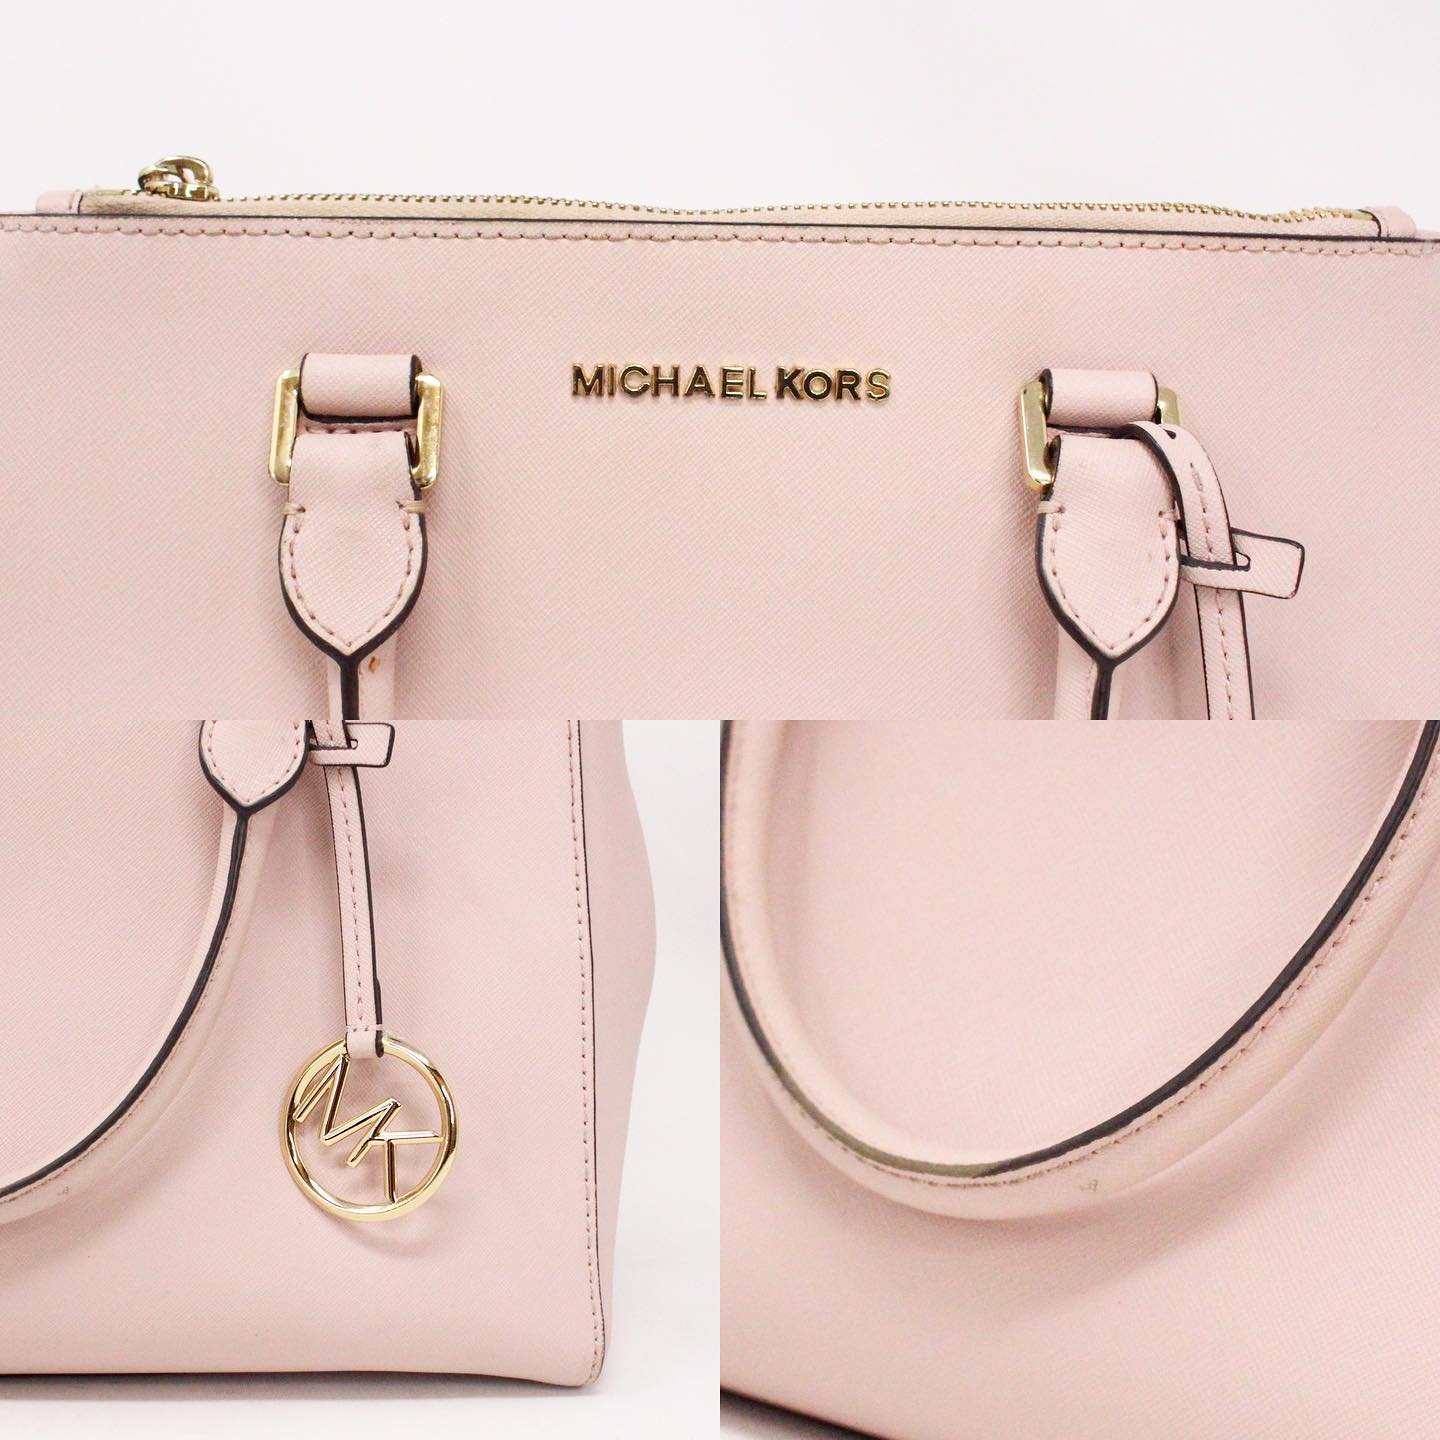 Michael Kors, Bags, Michael Kors Light Pink Tote With Chain Straps